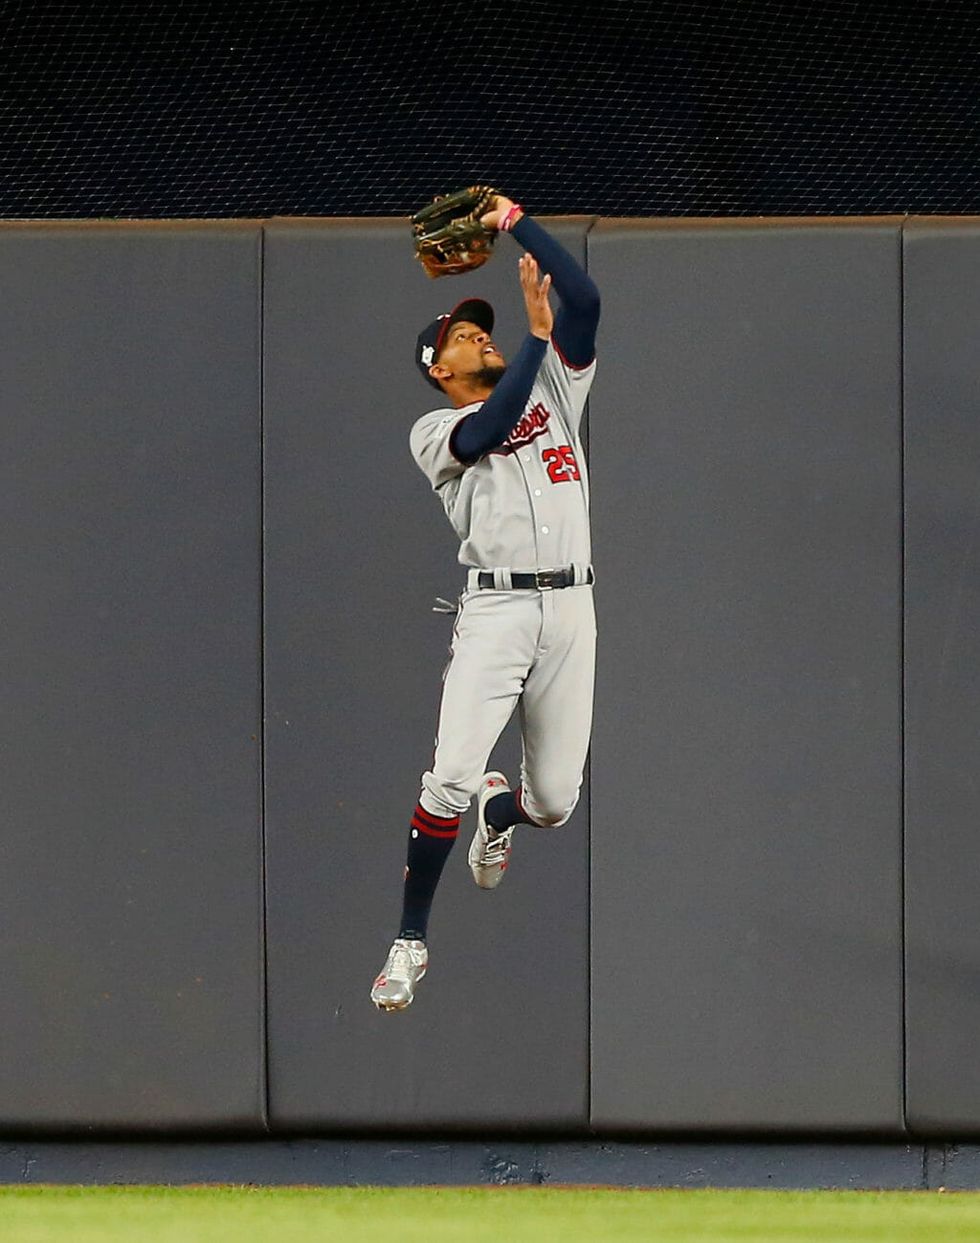 Byron Buxton Named Overall Defensive Player of the Year for 2017